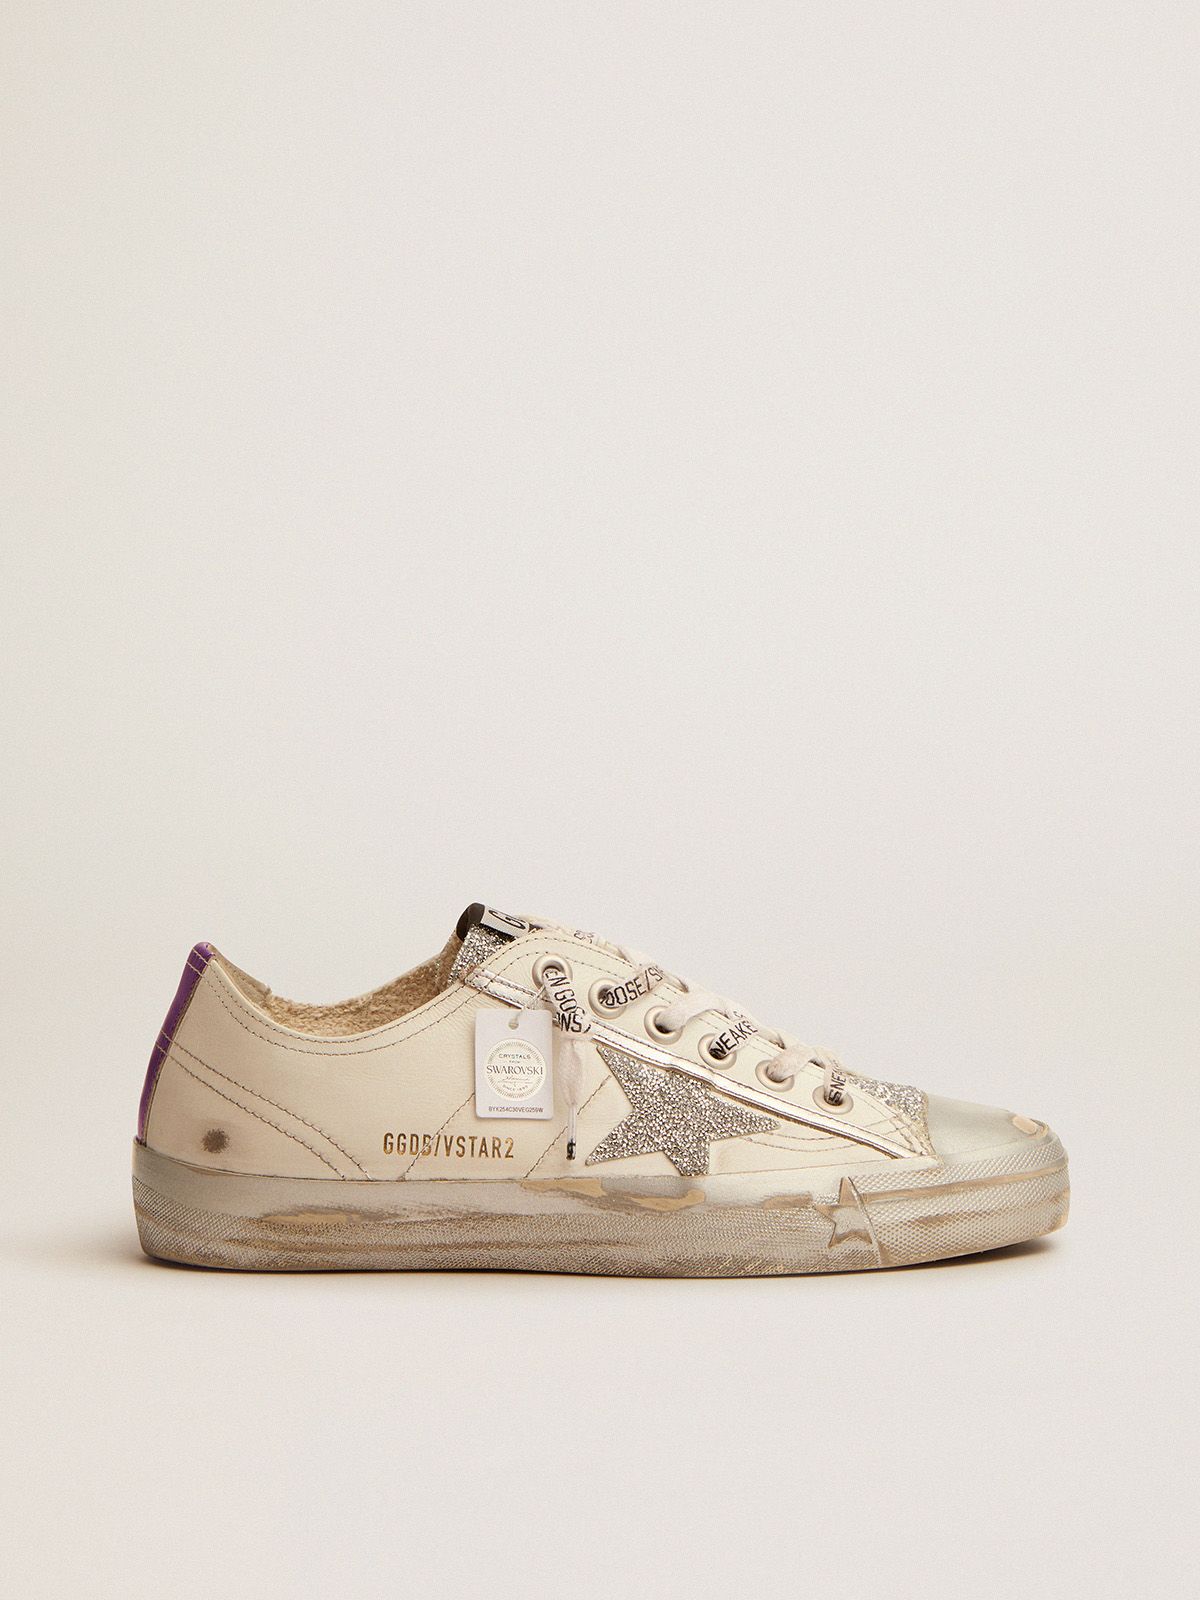 V-Star LTD sneakers in white leather and crystals